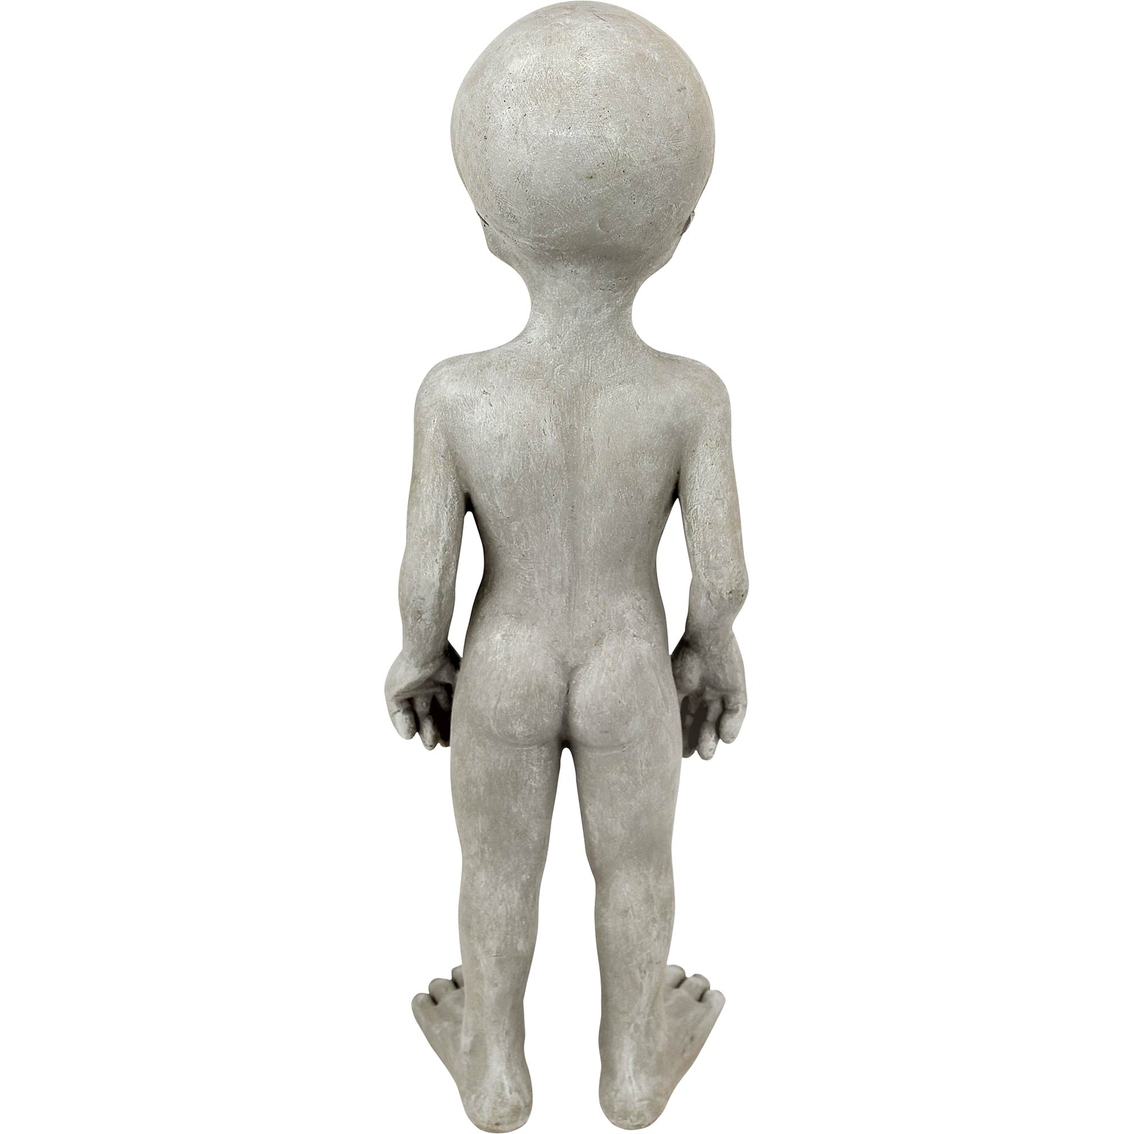 Design Toscano The Out-of-this-World Alien Extra Terrestrial Statue: Small - Image 4 of 4